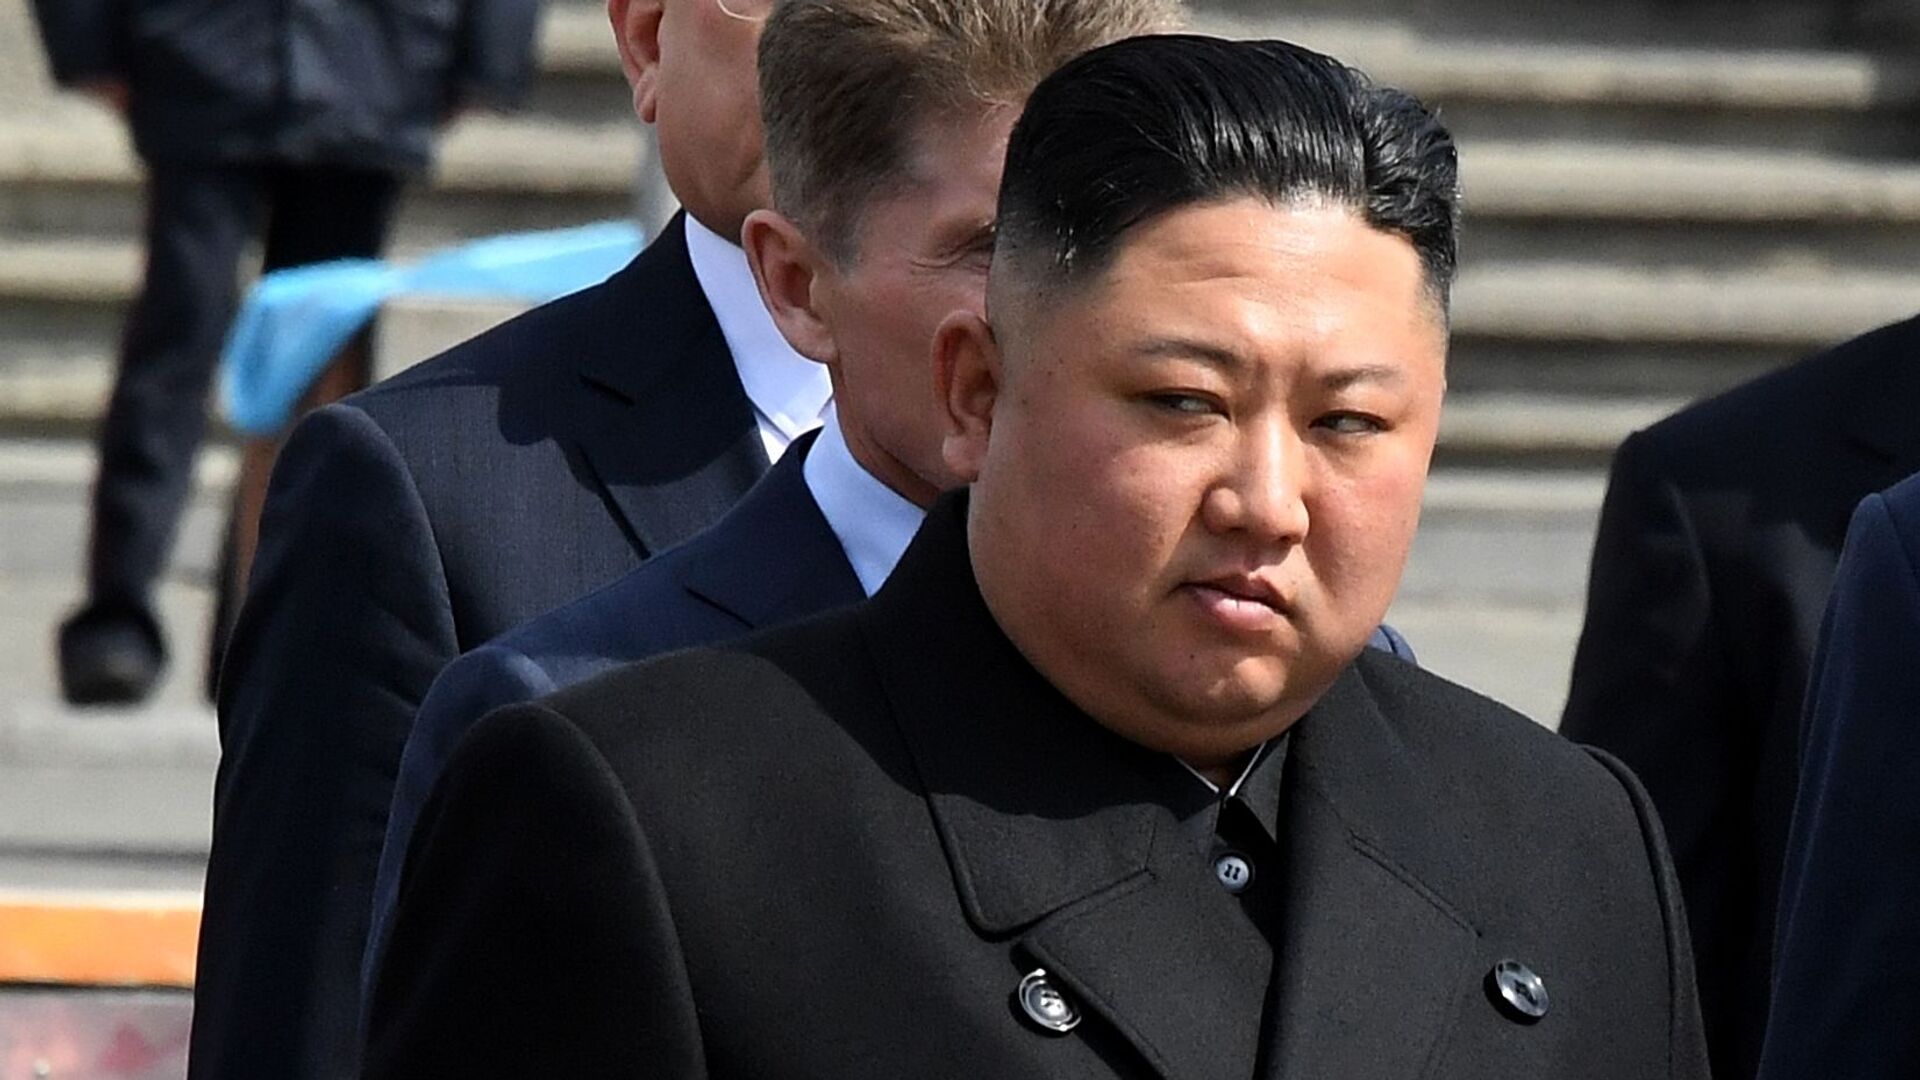 In Military Parade N Korean Leader Vows To Strengthen Nuclear Power